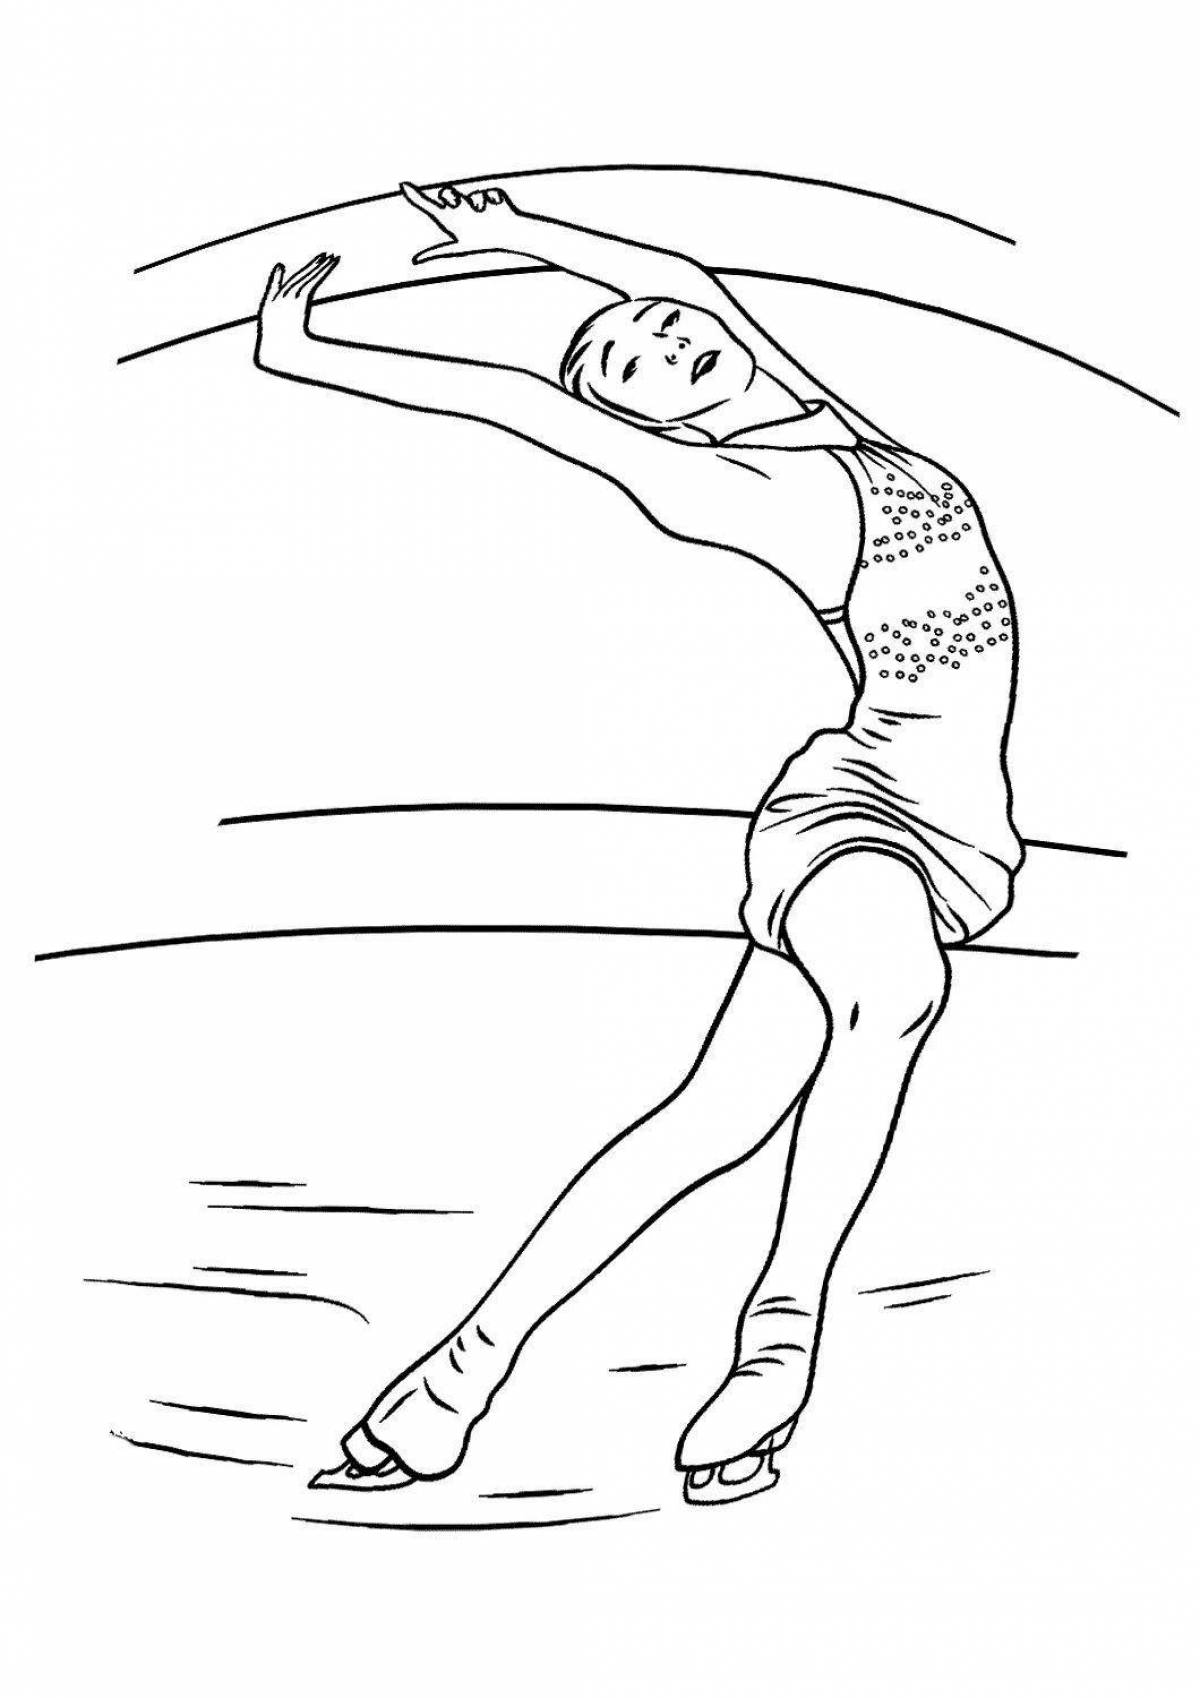 Creative figure skater coloring for kids